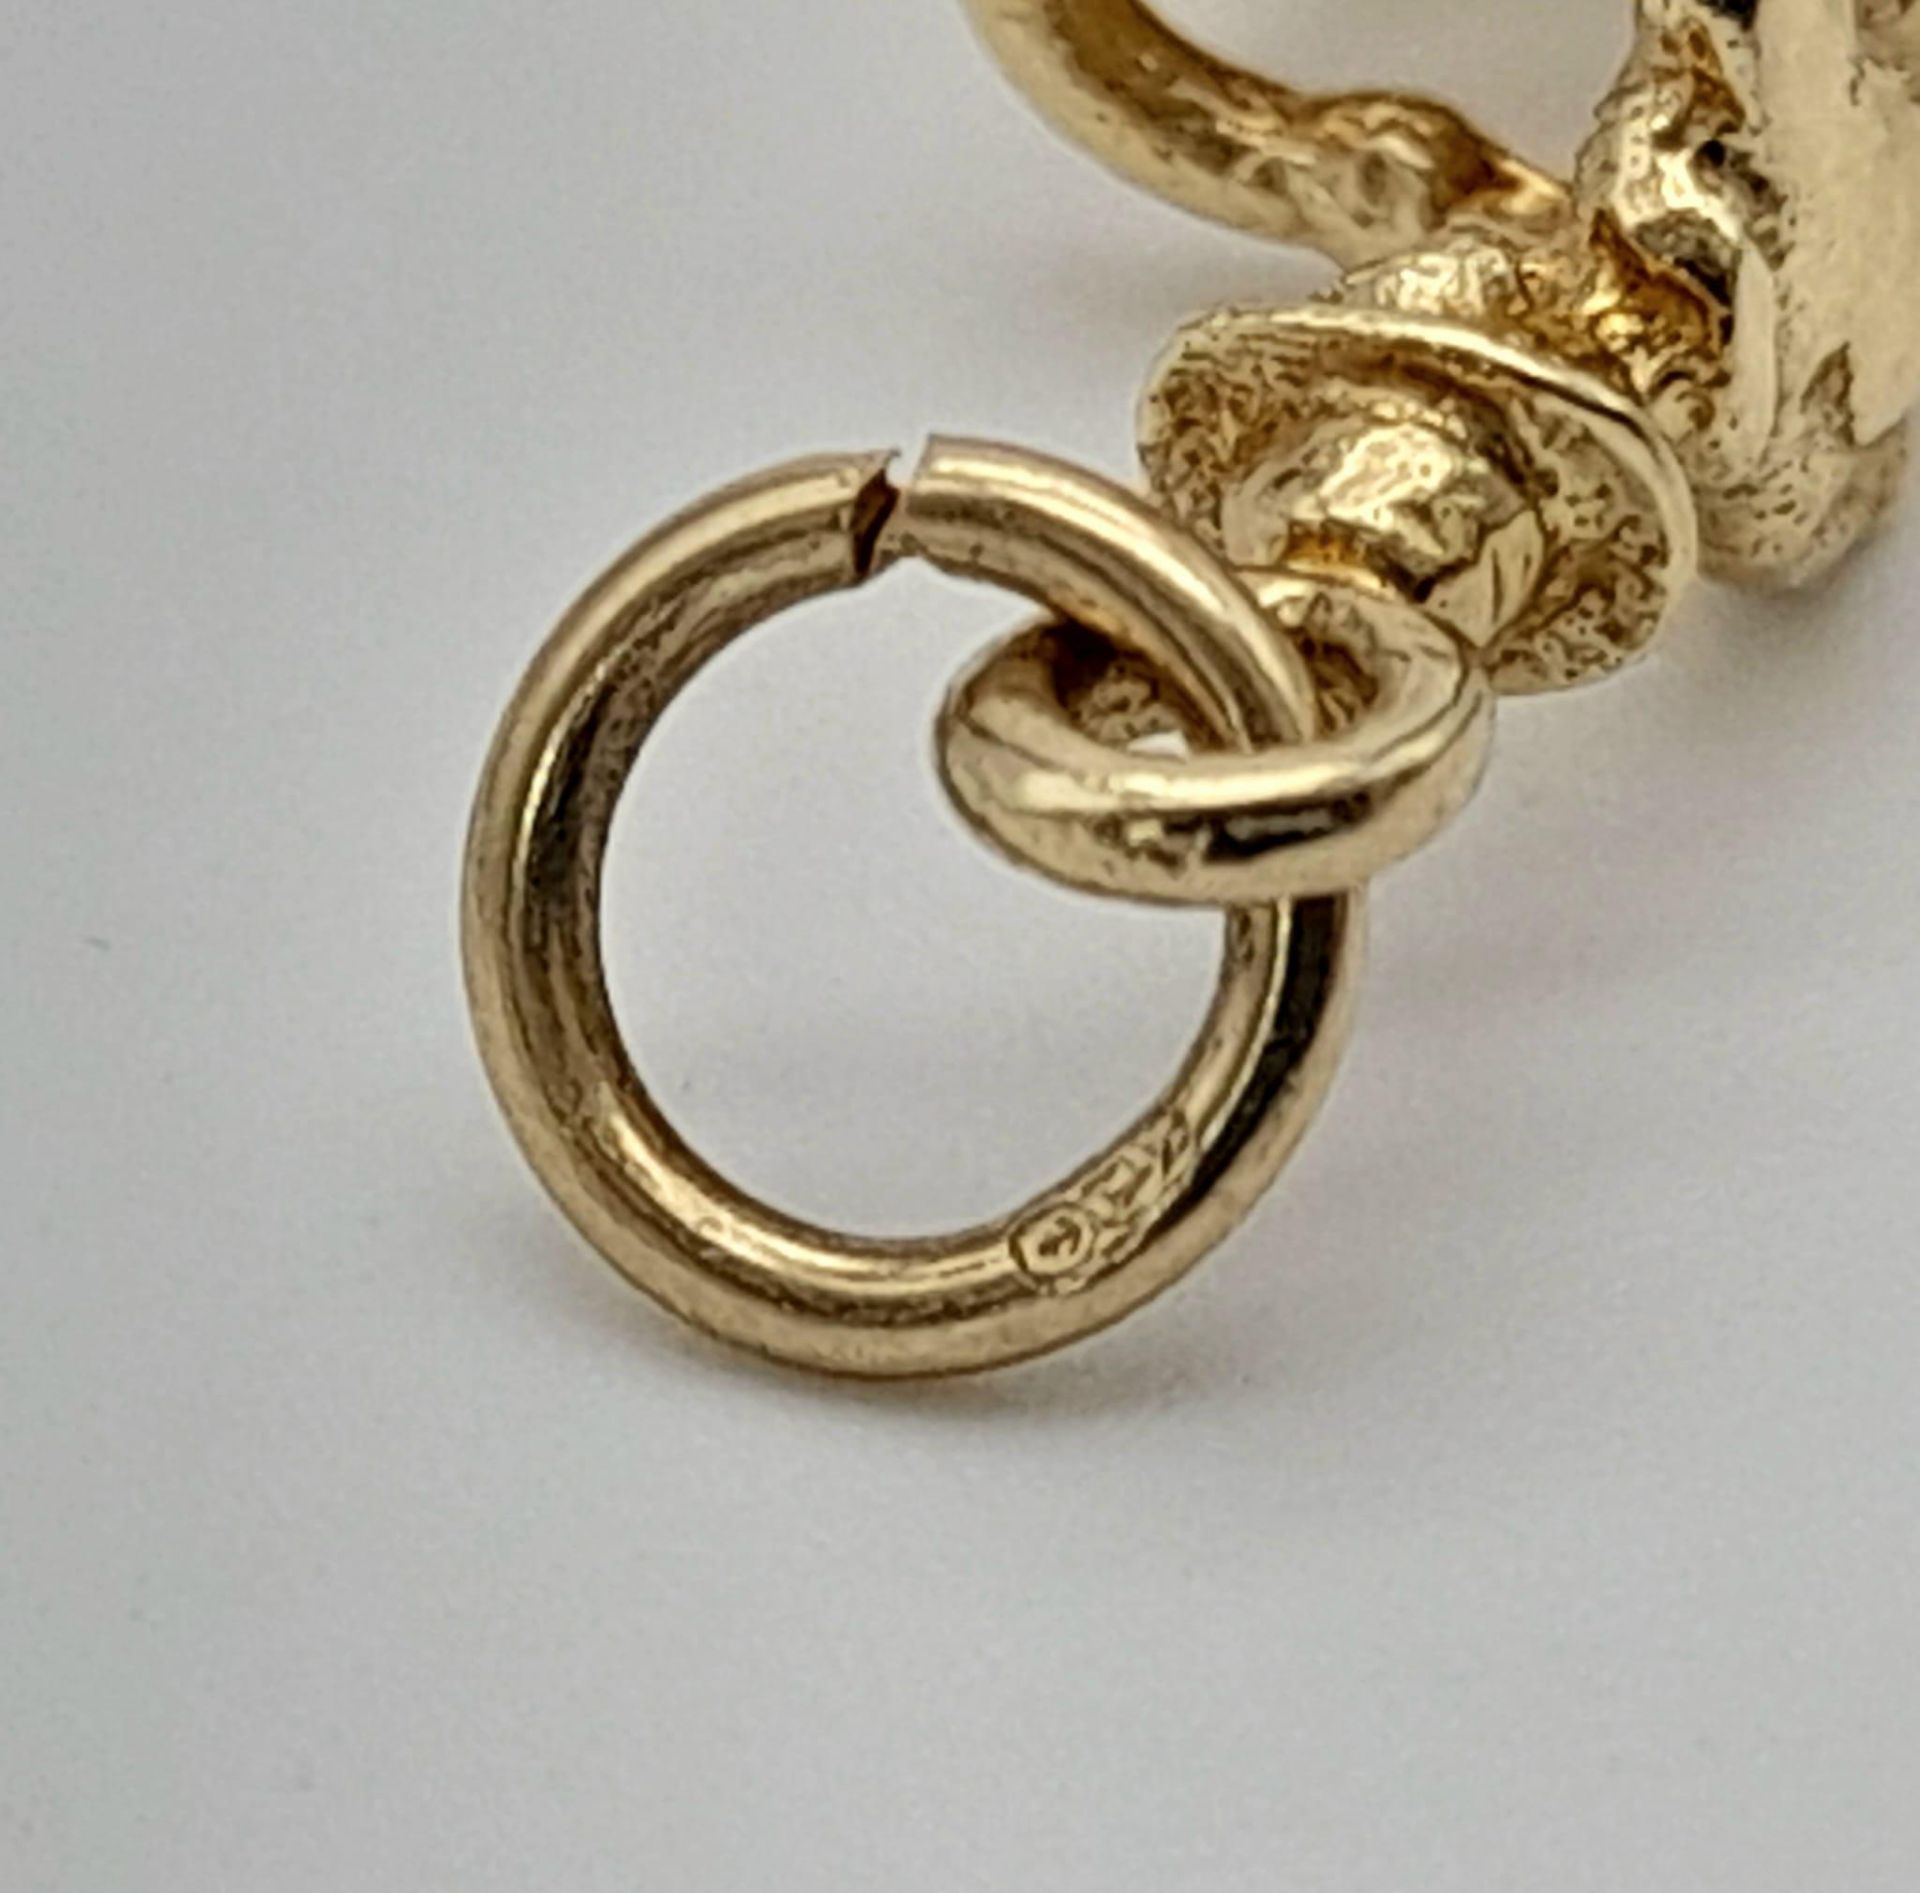 9K YELLOW GOLD PENNY FARTHING CHARM. 3.7G - Image 2 of 3